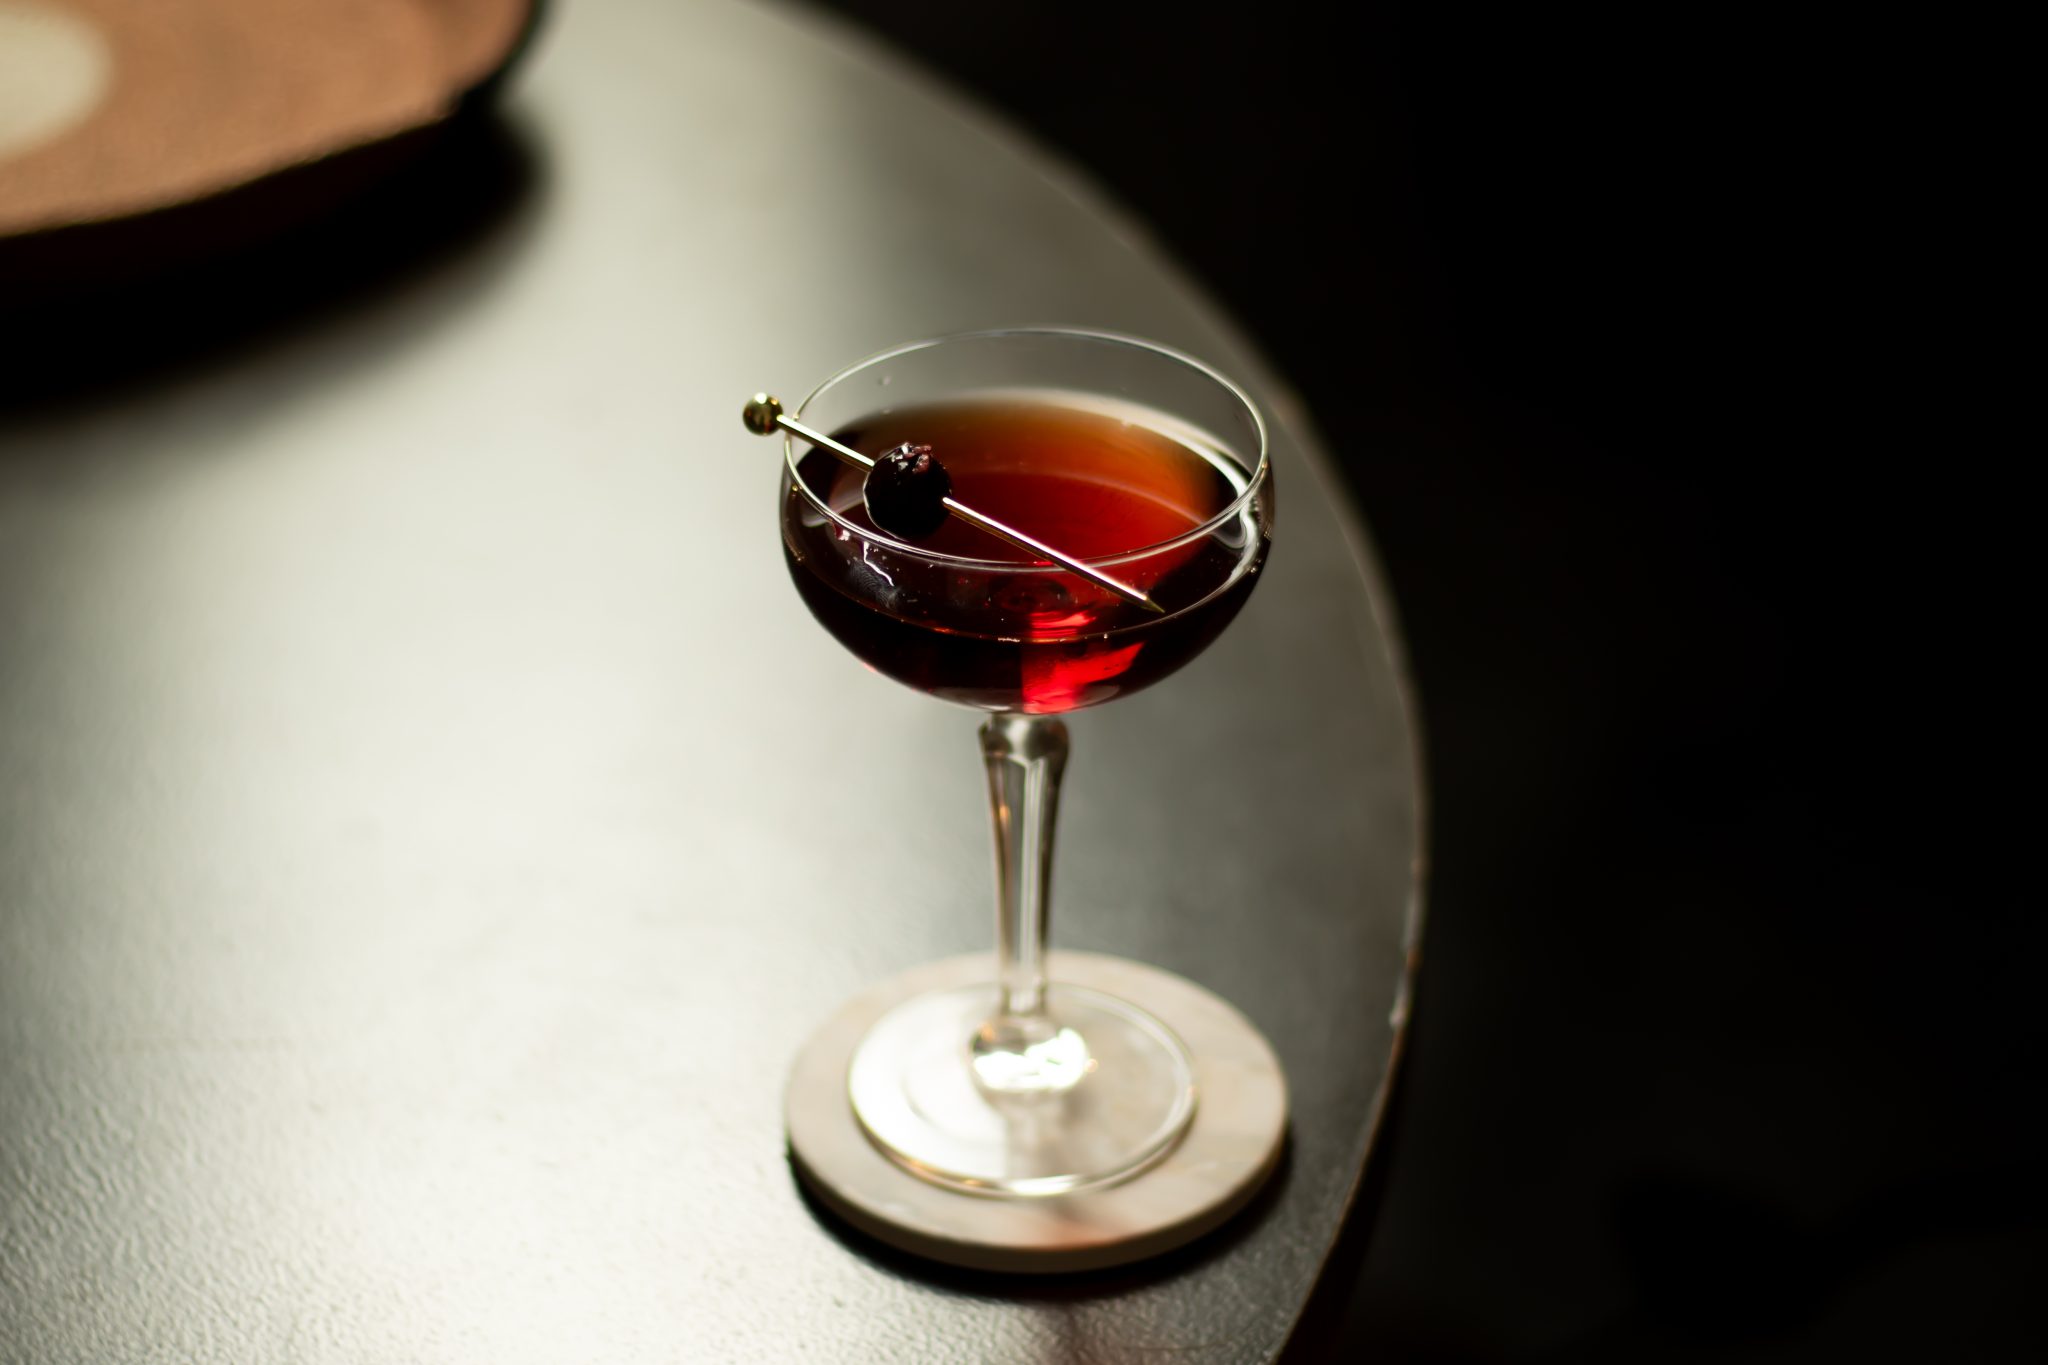 A side shot a Left Hand cocktail in a coupe glass on a white coaster on a black table in front of a black background